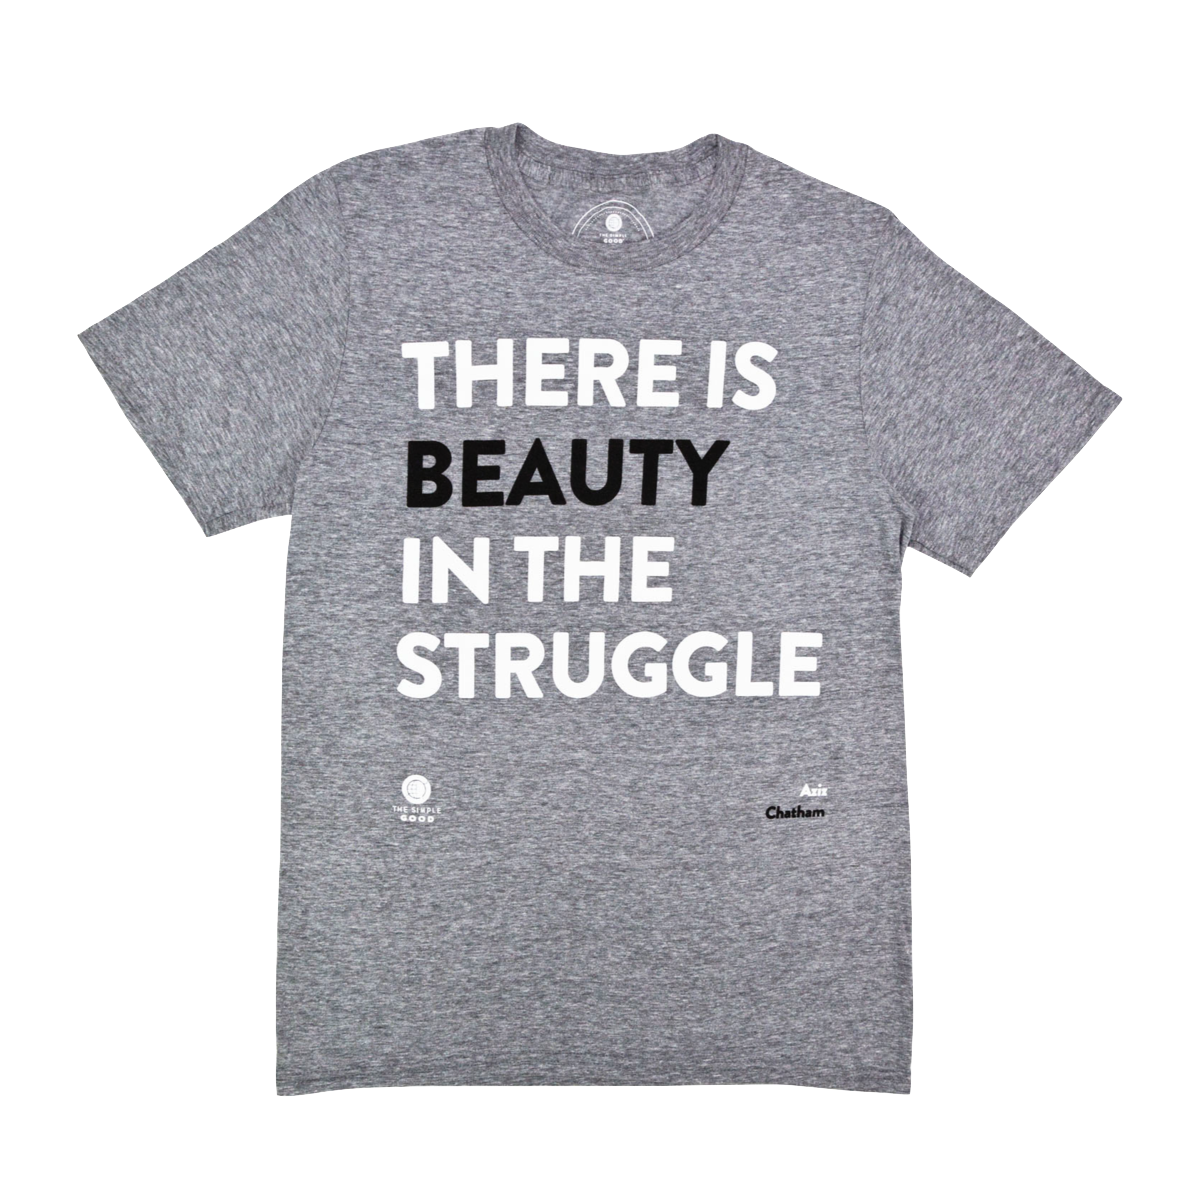 The Simple Good | 'There is Beauty in the Struggle' T-Shirt